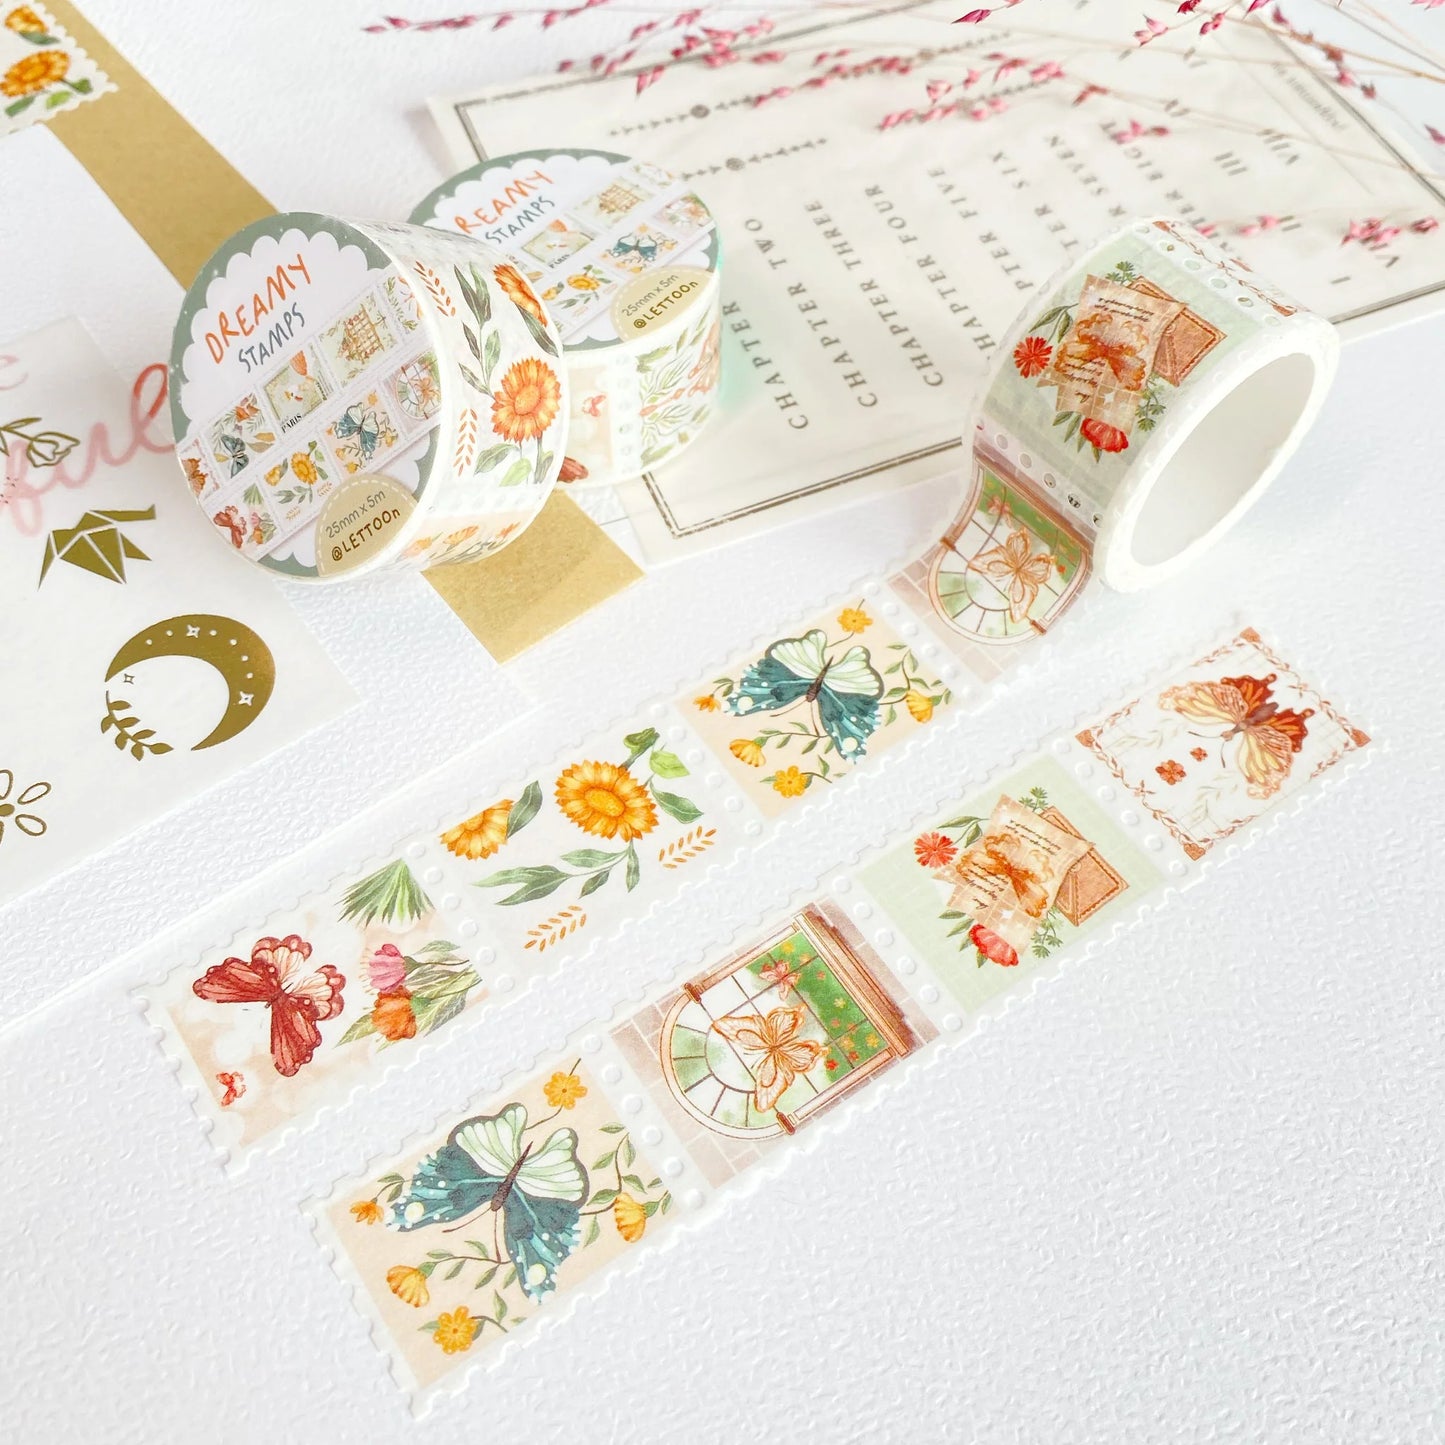 Washi tape Dreamy Stamps - LETTOOn